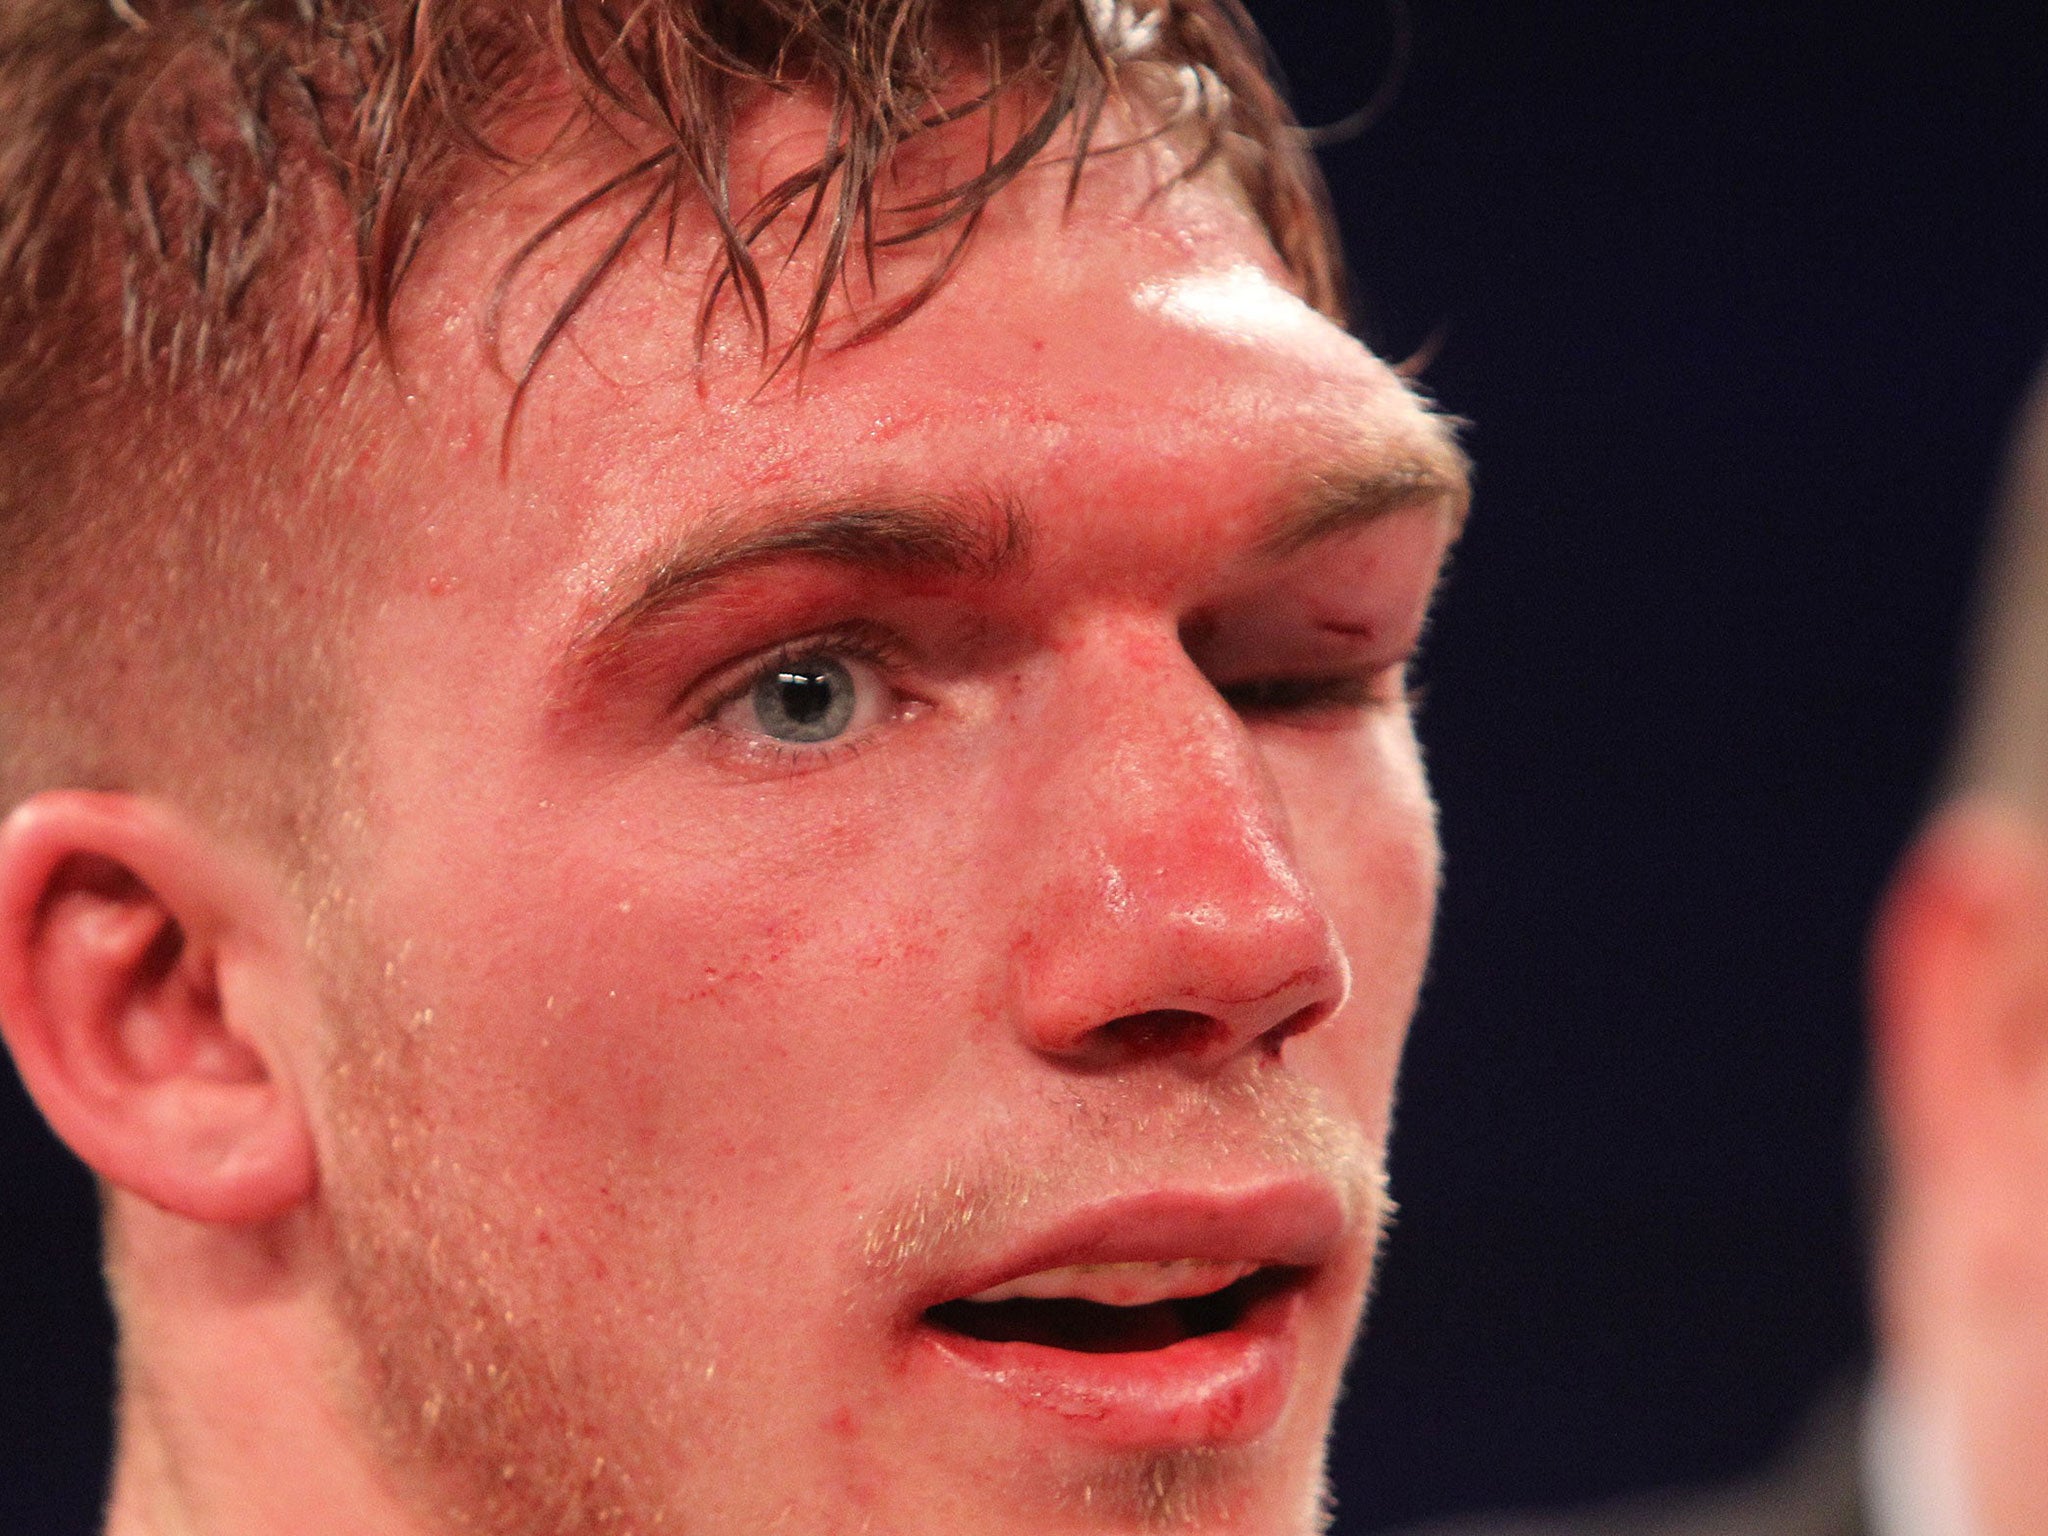 &#13;
Nick Blackwell's eye injury during his fight with Chris Eubank Jnr &#13;